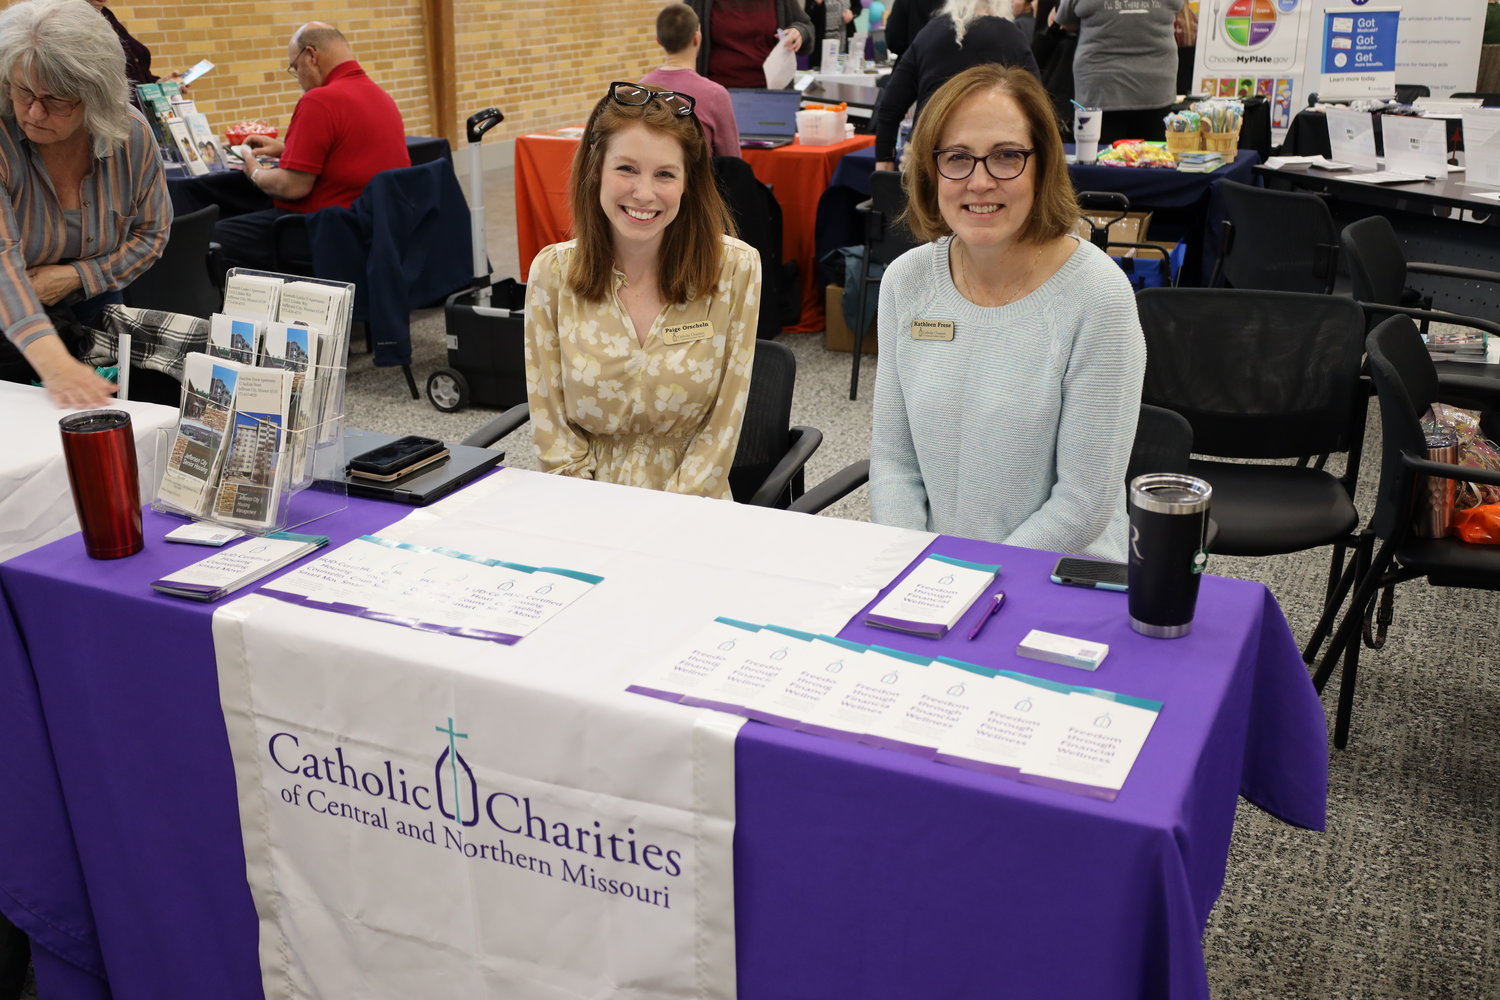 Staff and Volunteers participate in the Community Resource Fair, which helped connect over 100 attendees to local resources in health and healthcare, family services, mental health resources, pregnancy and parenting resources, nutrition and food access resources.